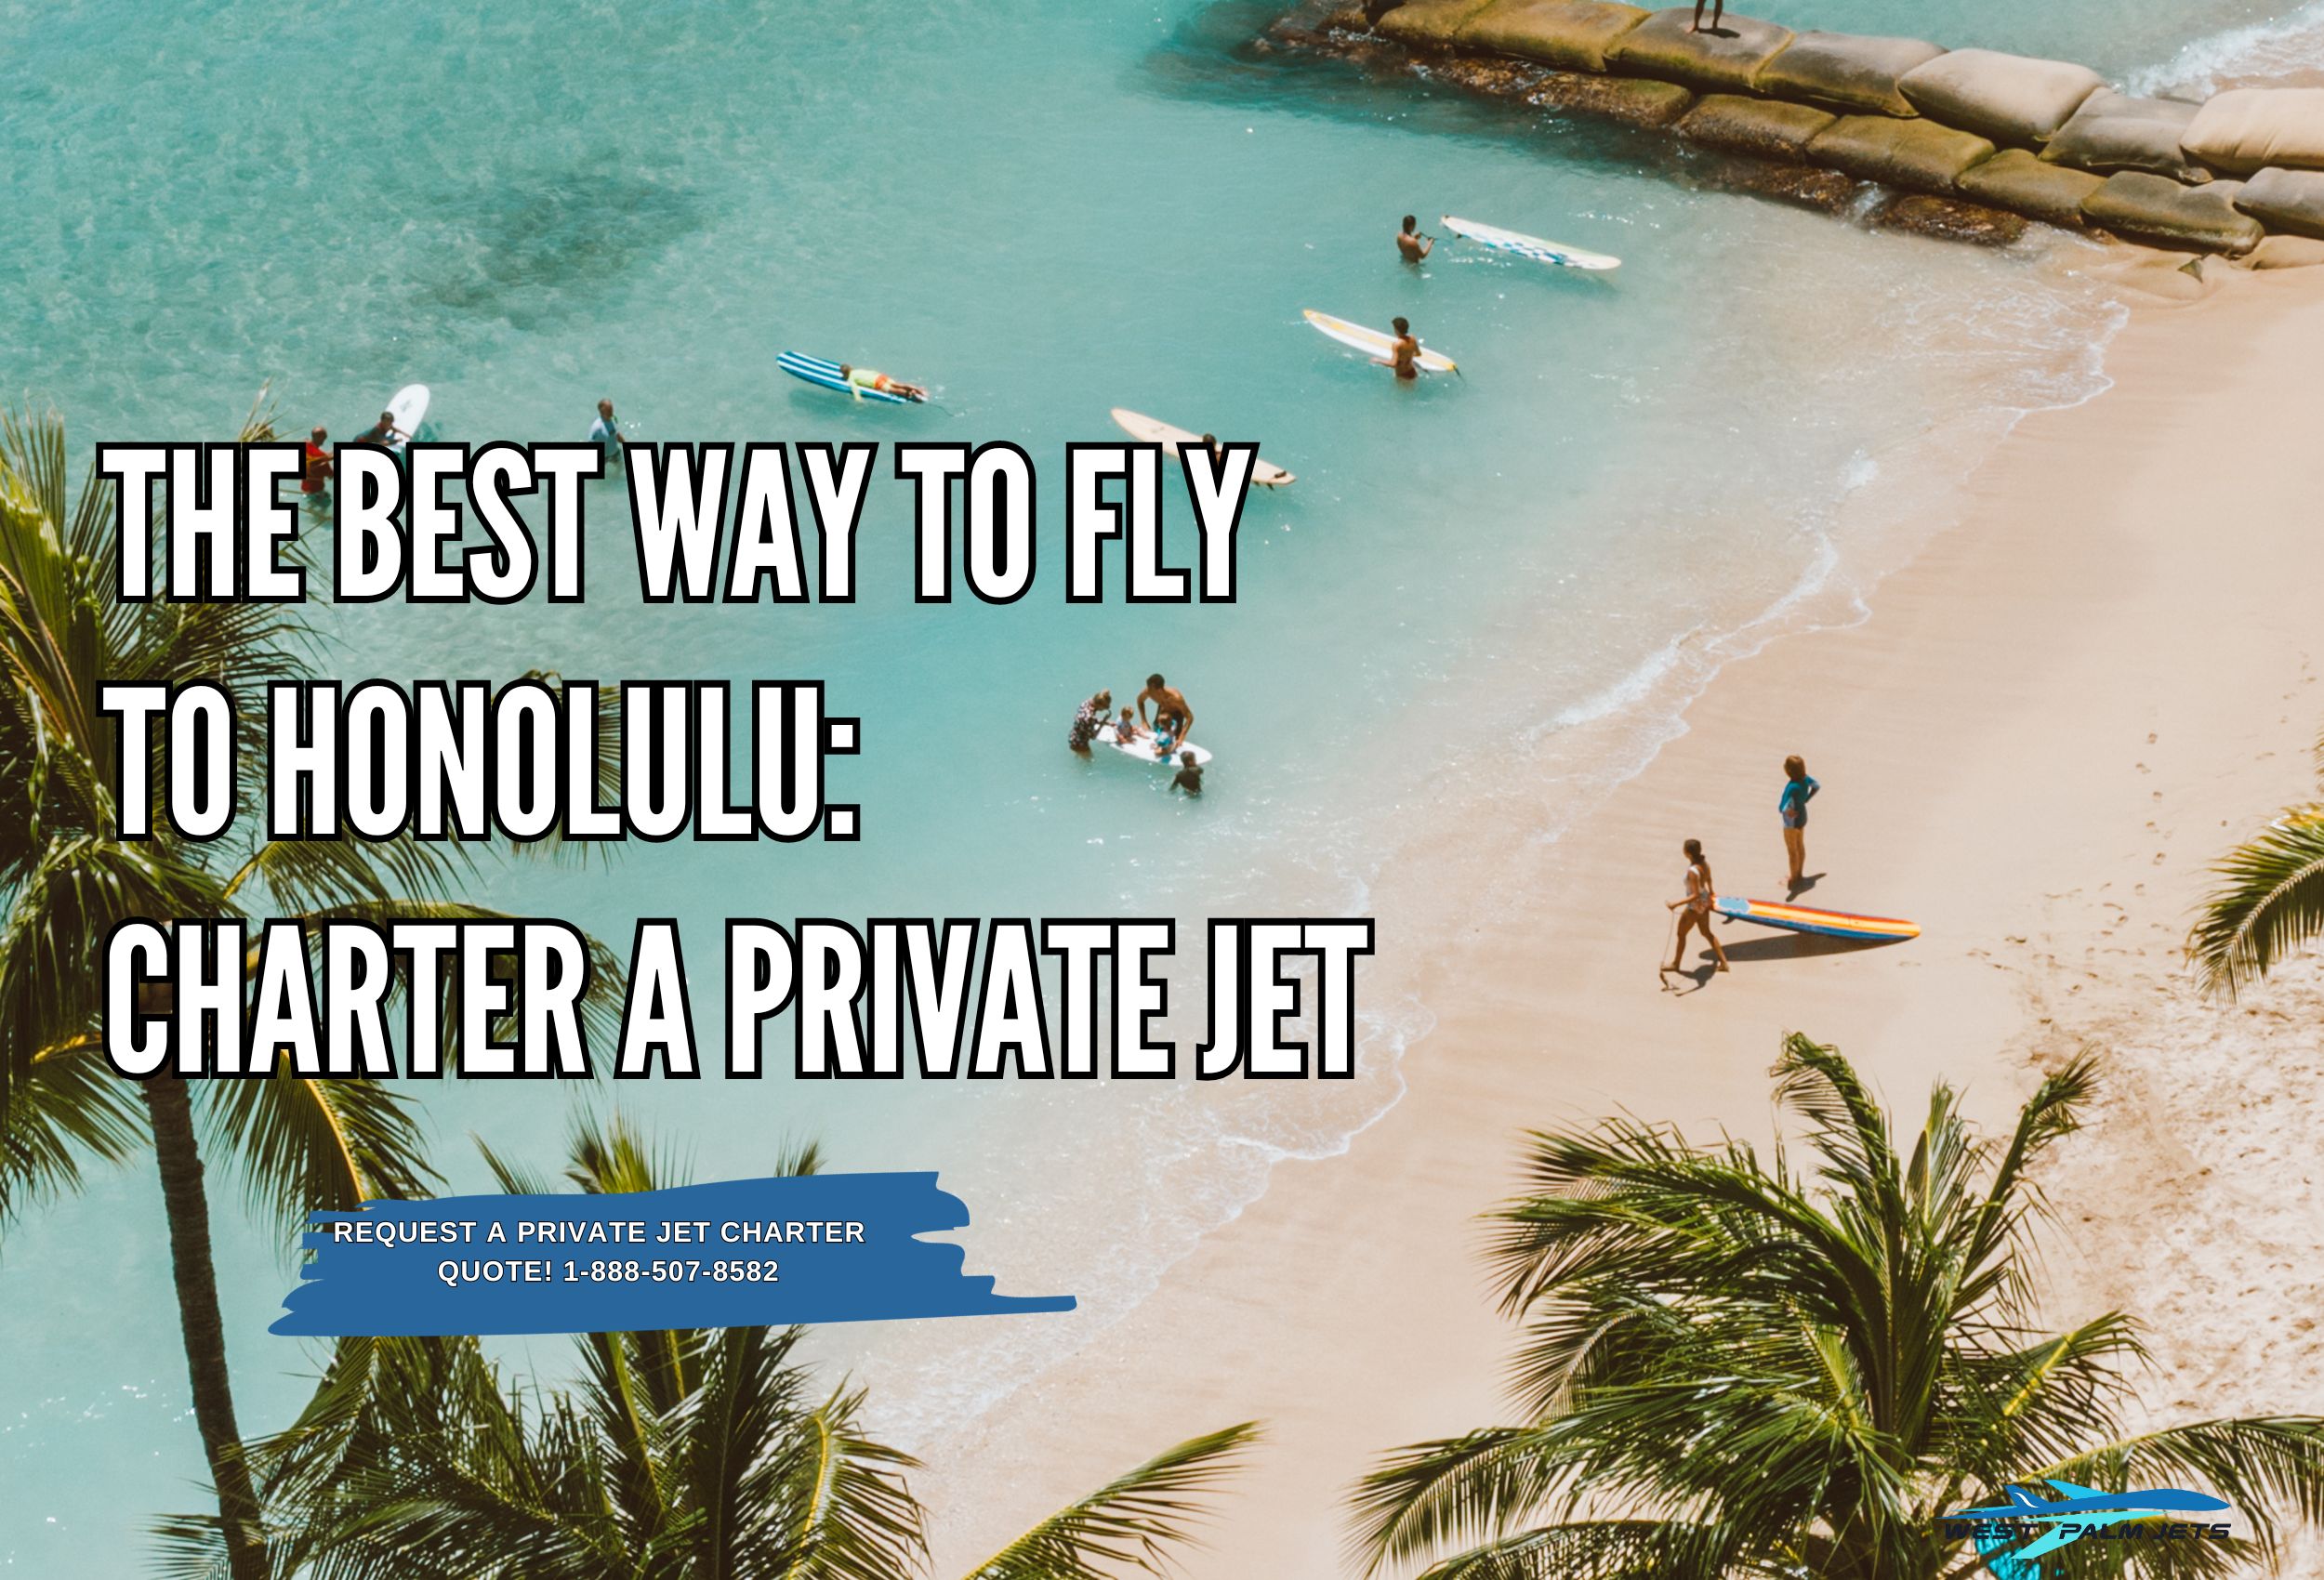 The Best Way To Fly to Honolulu Charter a Private Jet